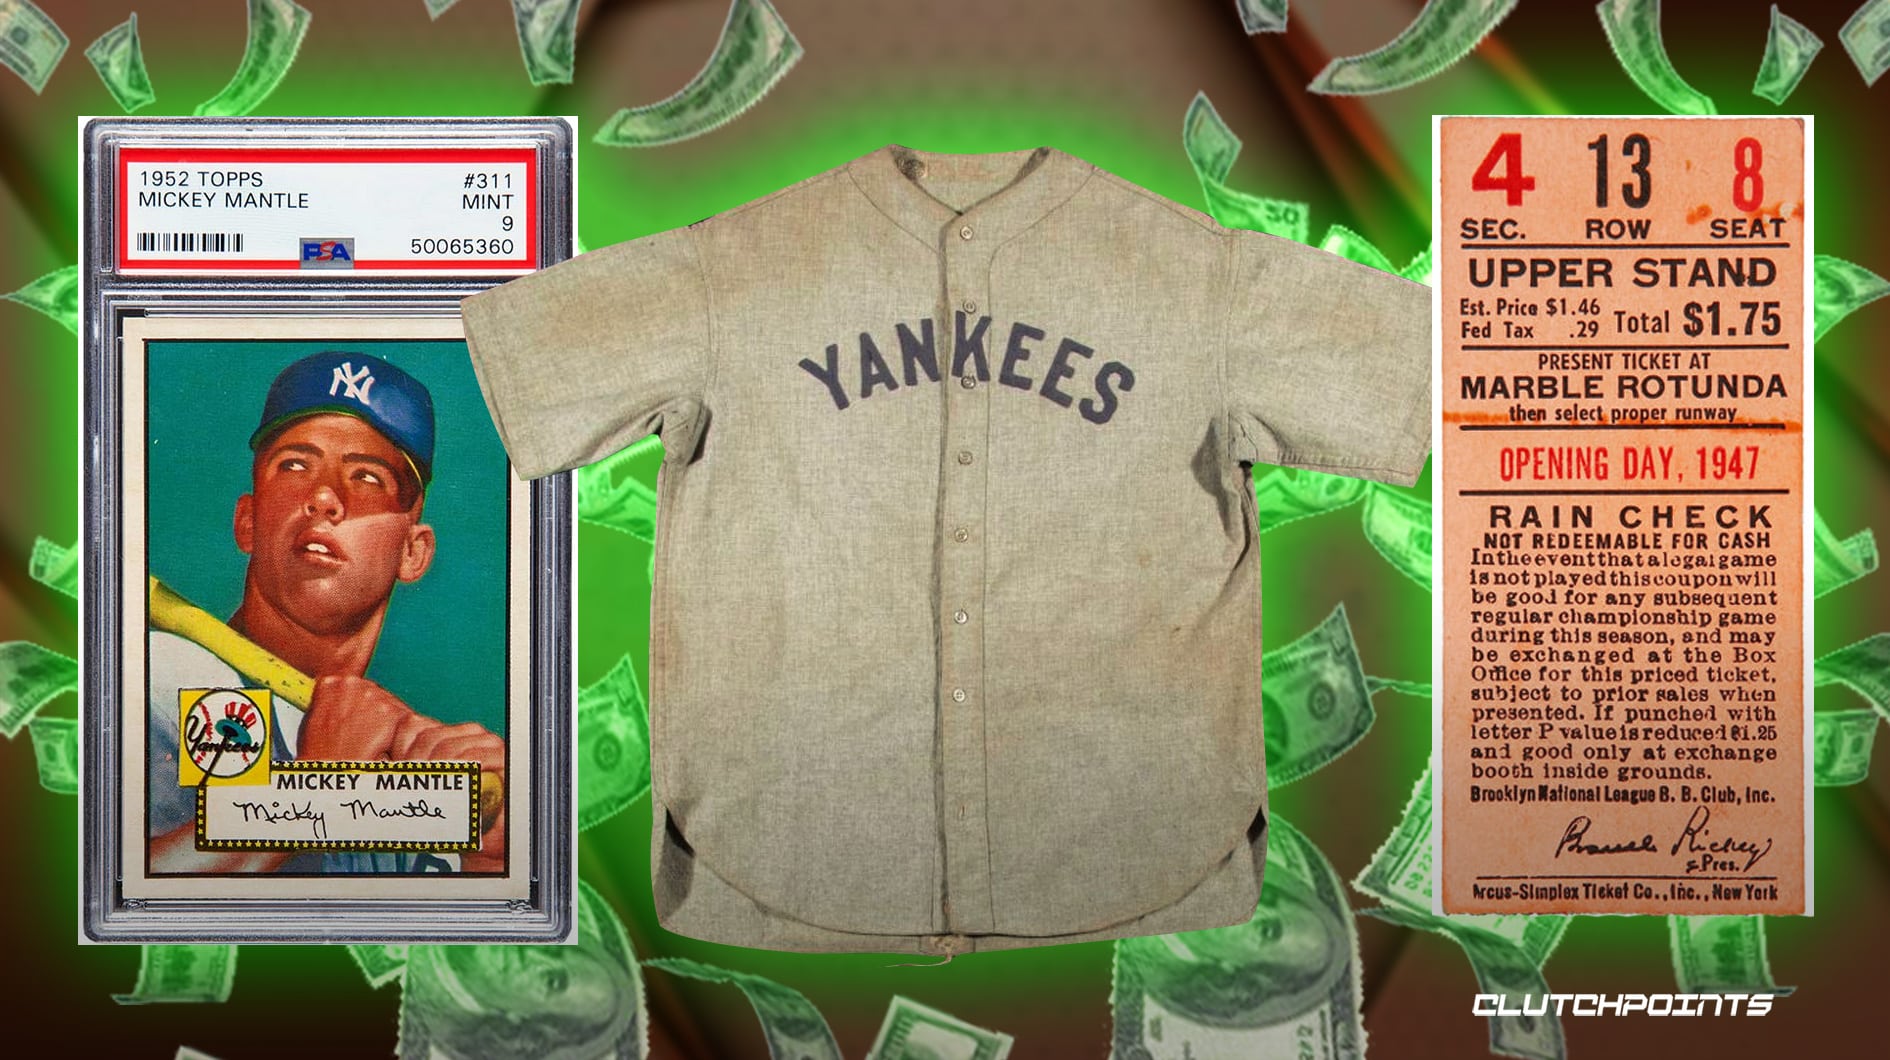 Jackie Robinson Day autographed jerseys up for bidding